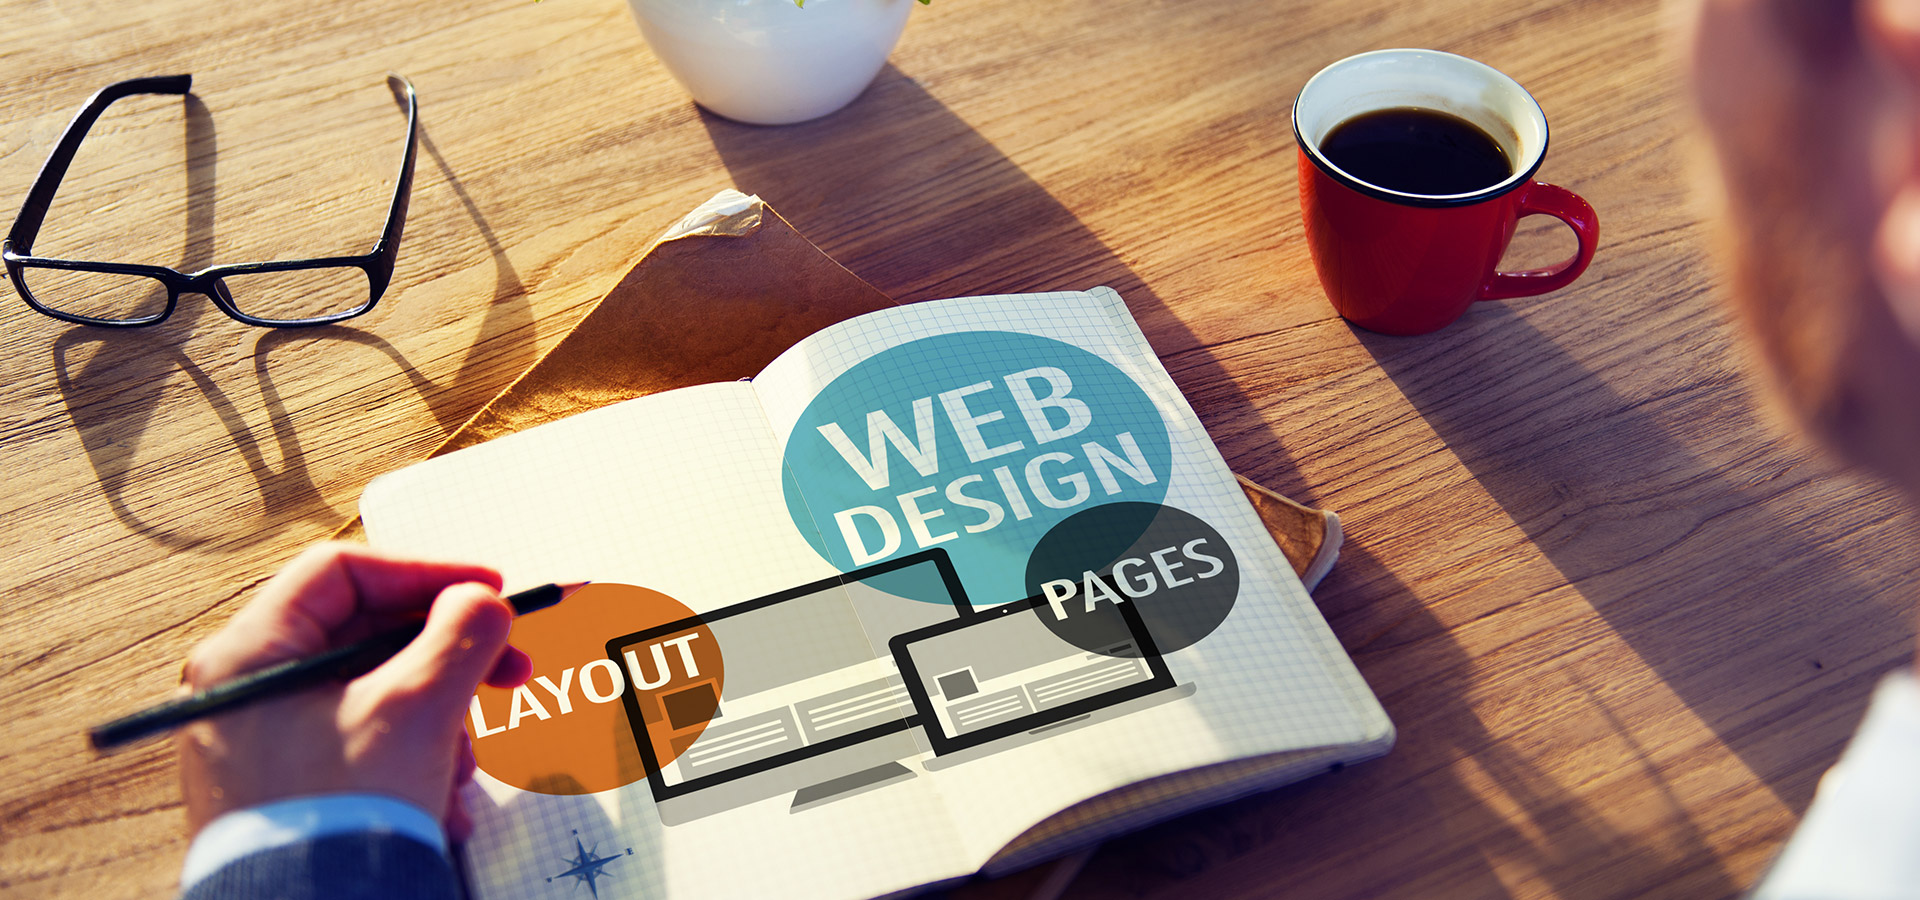 12 web design and development trends that can help any web 